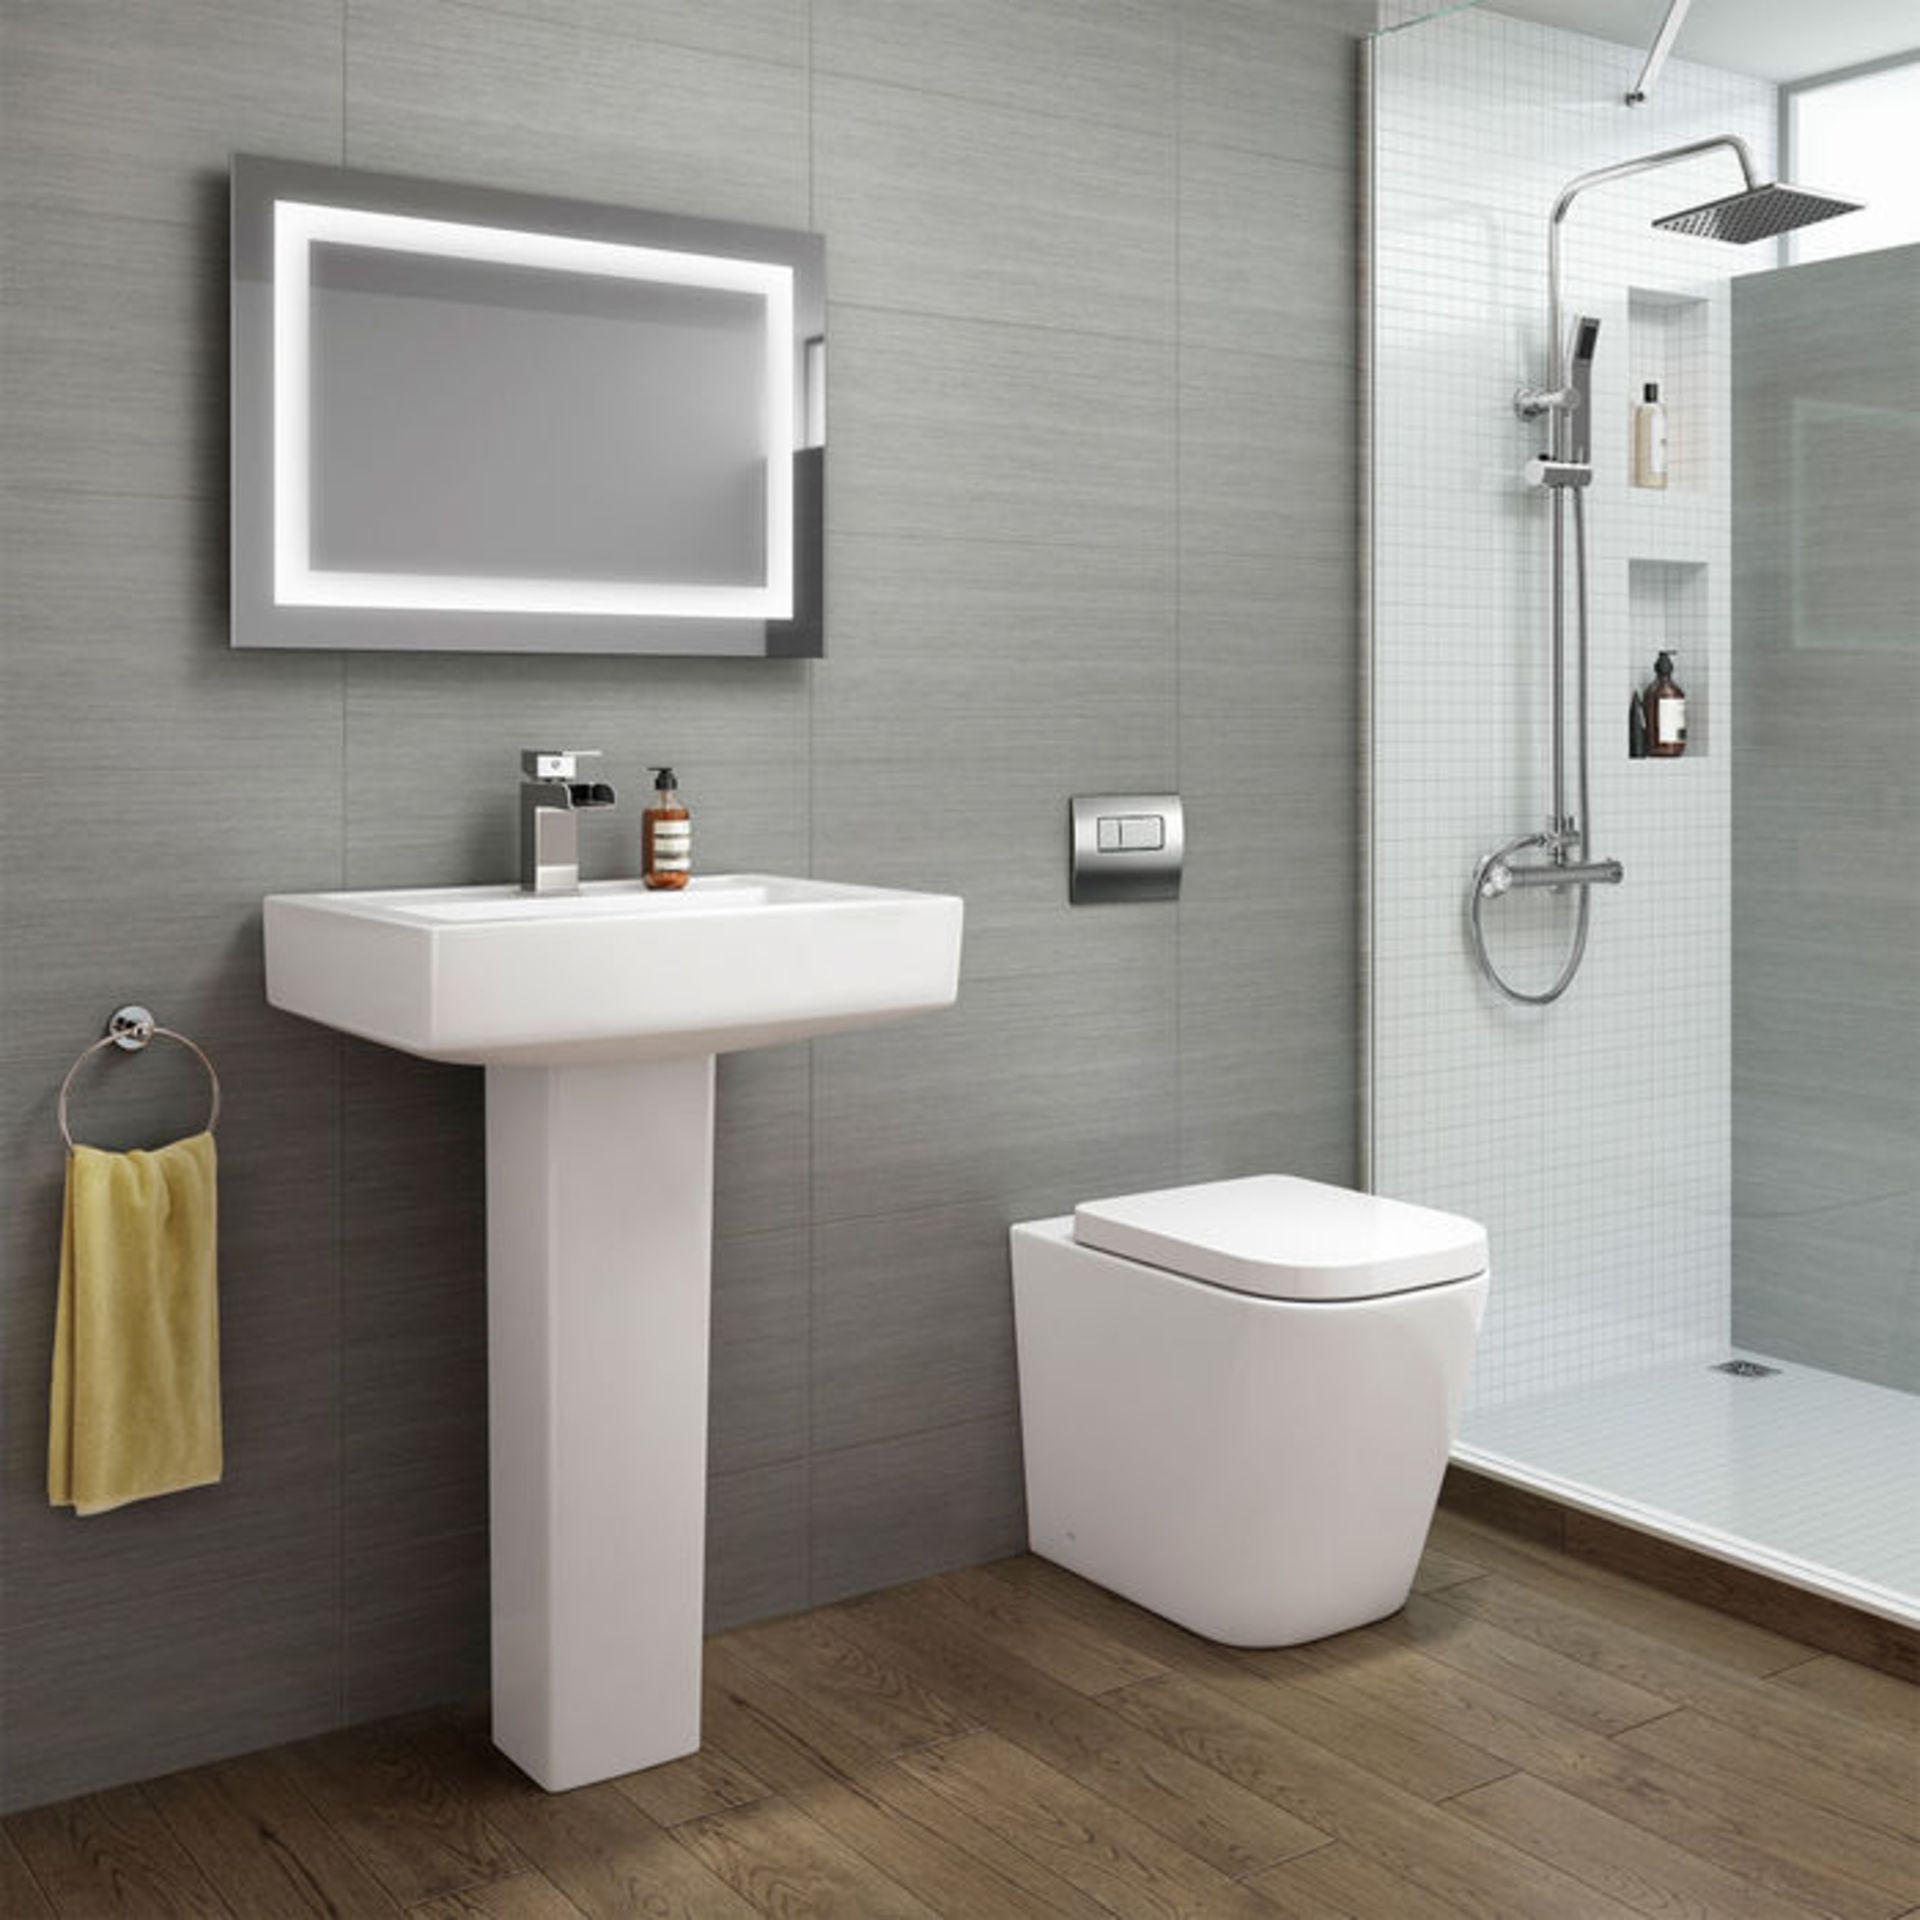 New Florence Rimless Back To Wall Toilet Inc Luxury Soft Close Seat. Rimless Design Makes It Ea... - Image 2 of 2